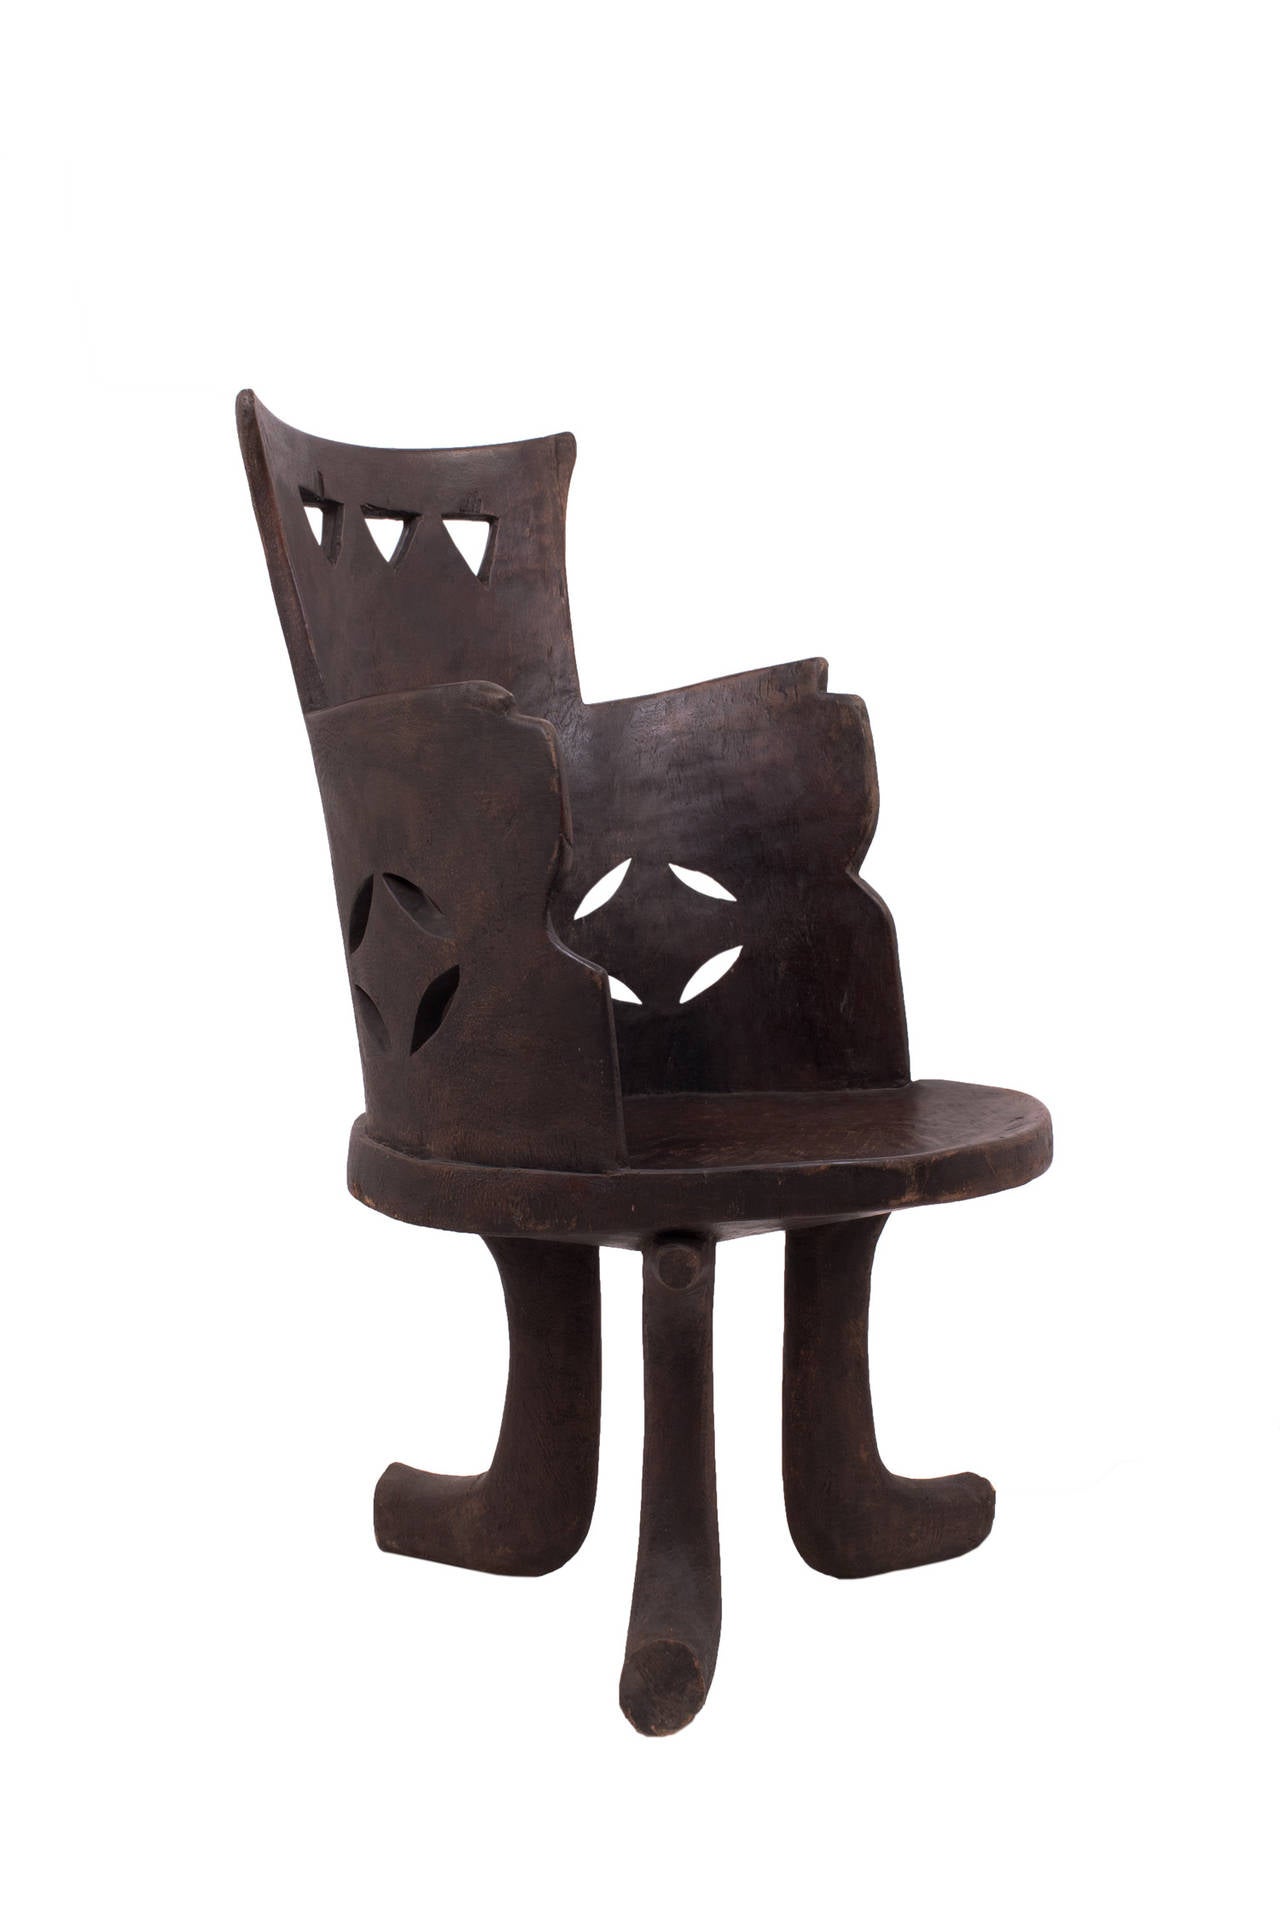 Carved from a single piece of wood, this chair is like a functional piece of sculpture. The curve in the seat of the chair provides support, the three legs are fully balancing. These items are never produced en masse and are exceedingly hard to